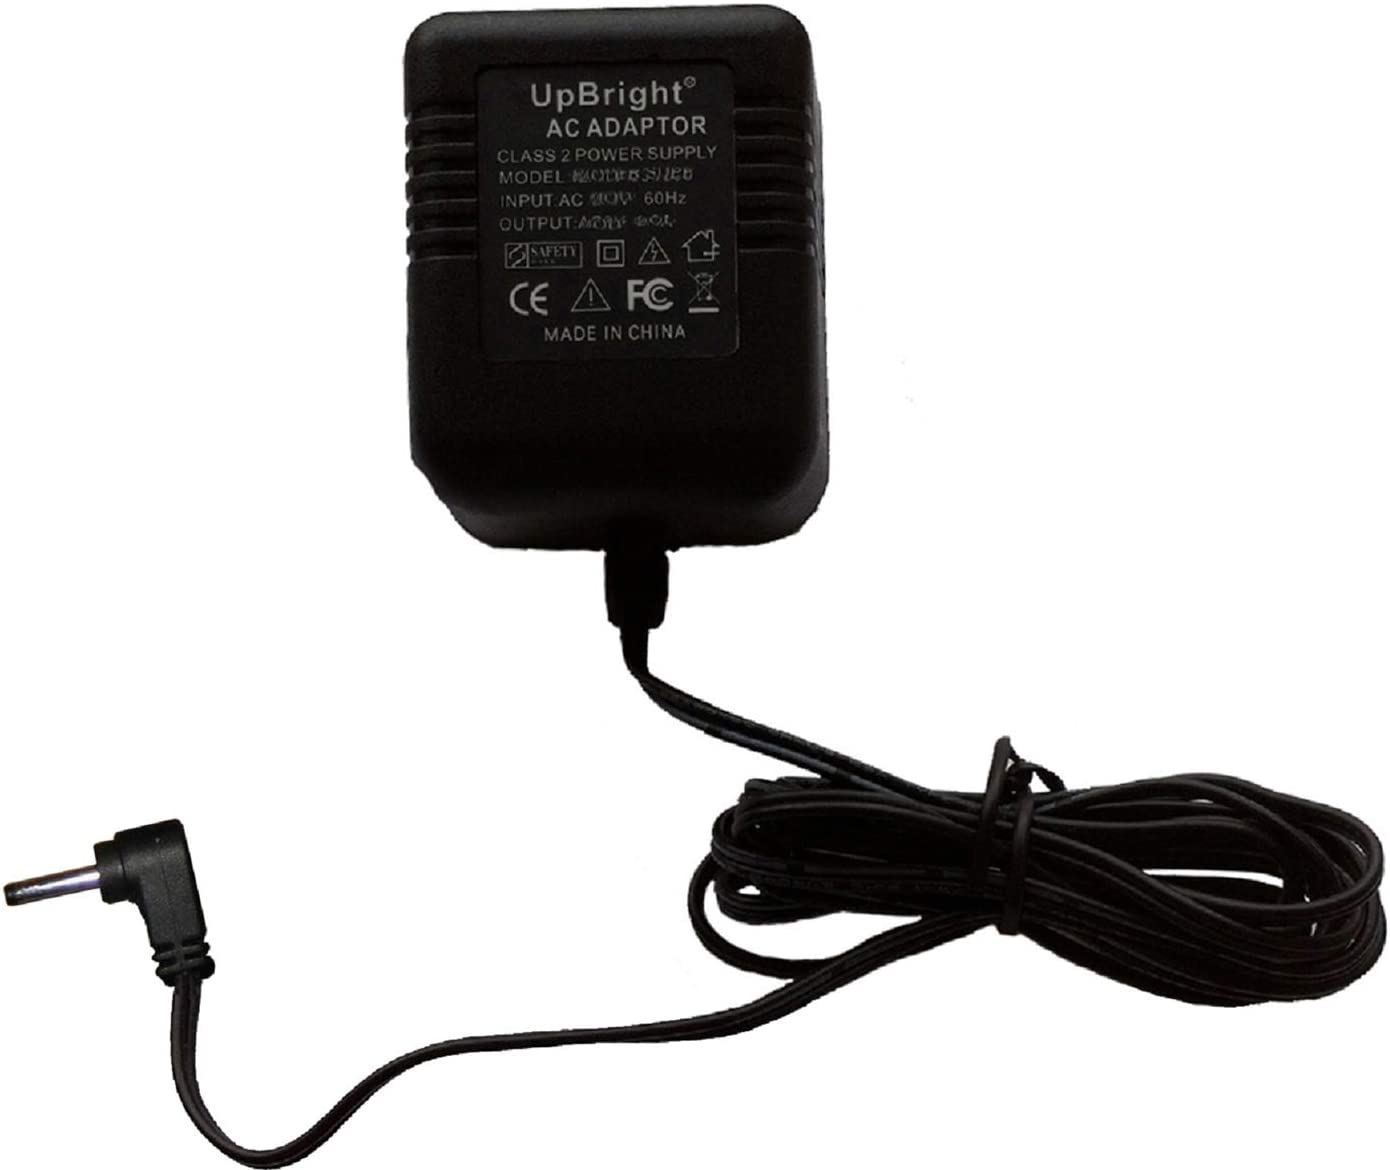 UPBRIGHT Extra Handset Cradle Power Supply AC Adapter Wall Charger PSU For AT&T CL84102 CL84109 CL84209 CL84309 DECT 6.0 Digital Cordless Phone HD Audio Answering System - image 1 of 5